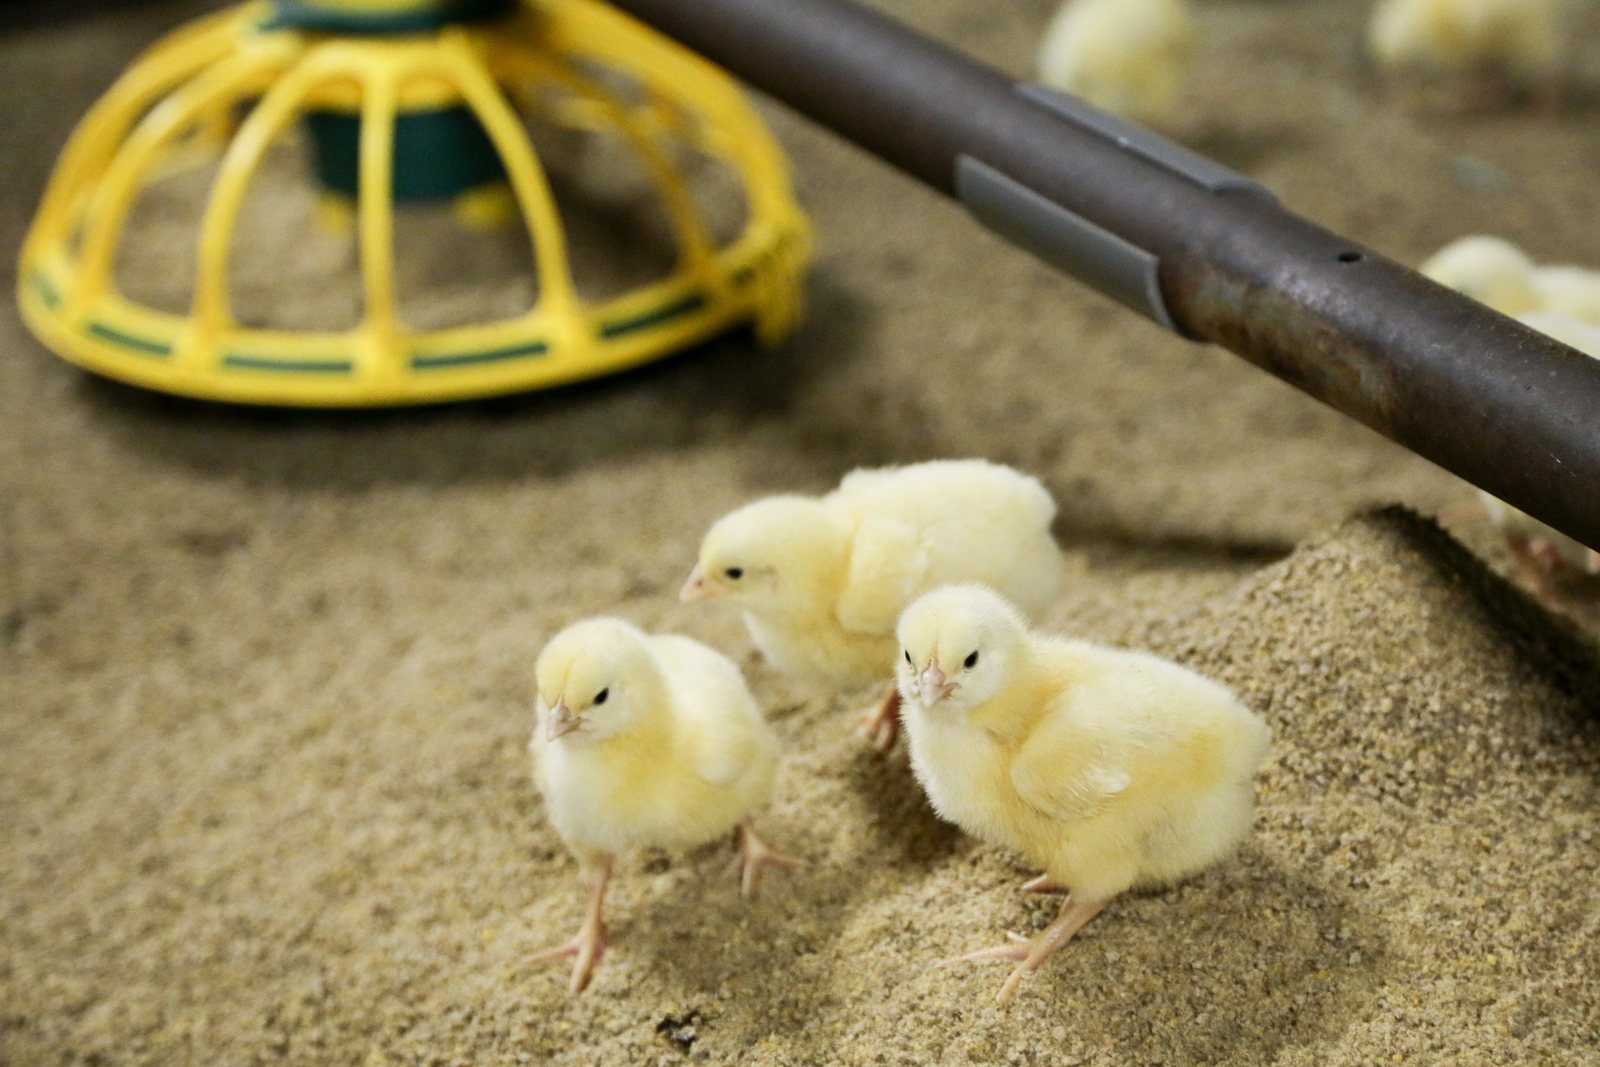 Fermented soy products gaining popularity in poultry diets - All About Feed